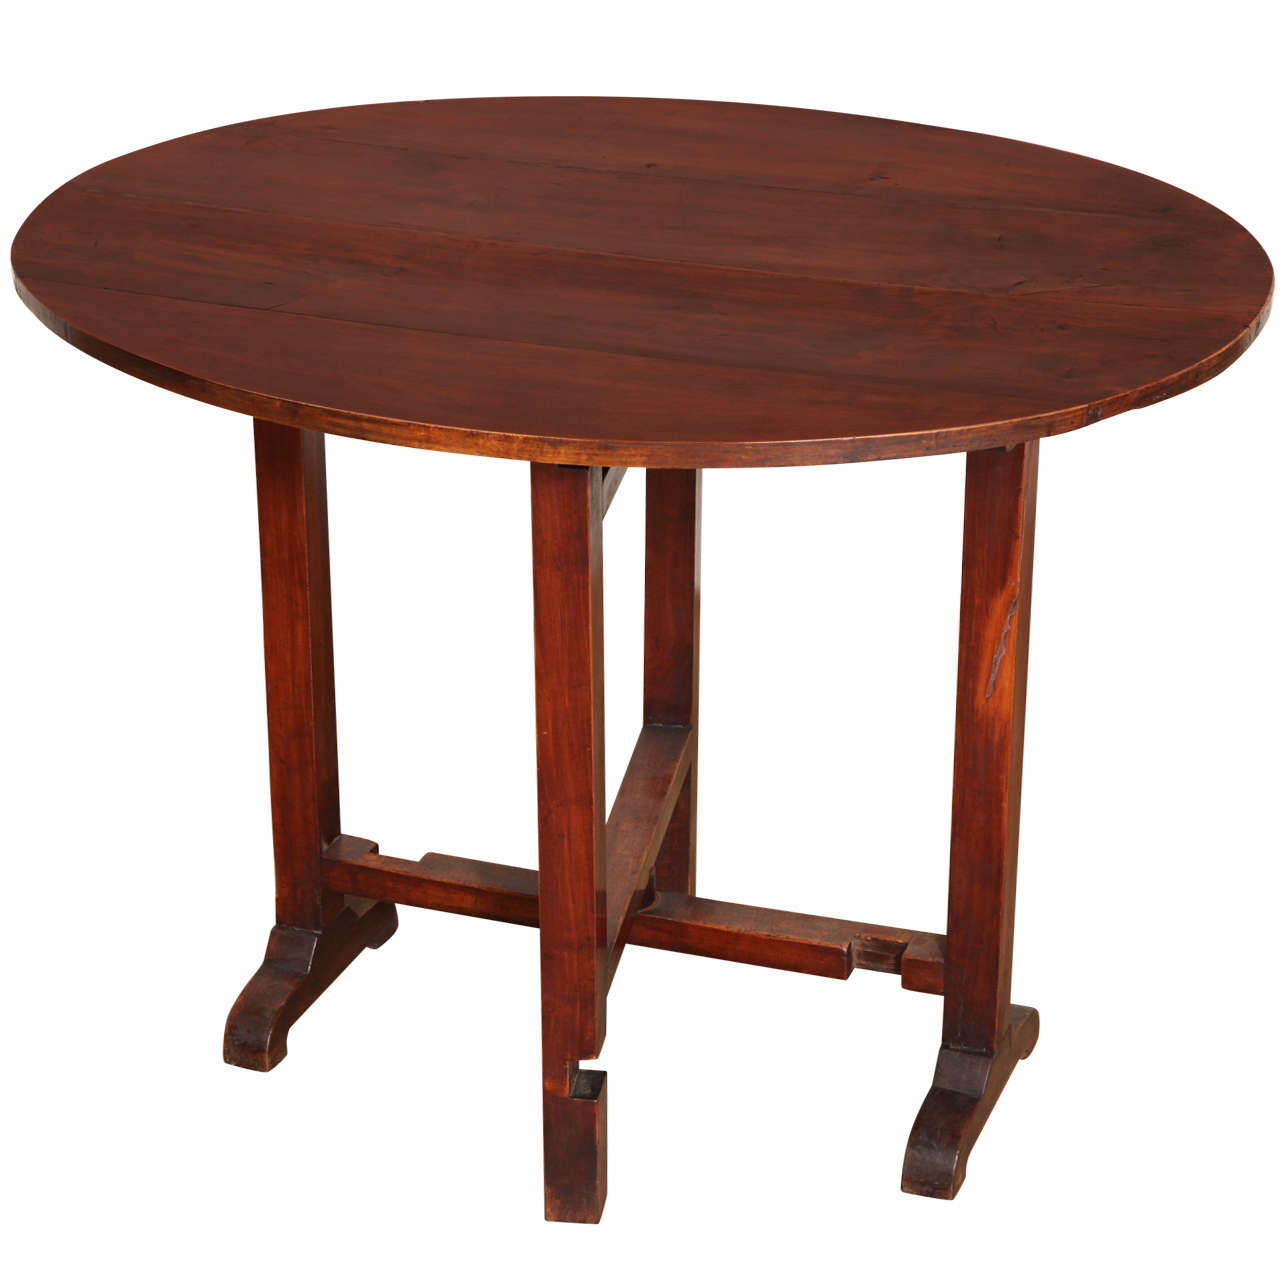 French Oval Cherry Folding Tilt Top Side Table, Late 19th or 20th Century For Sale